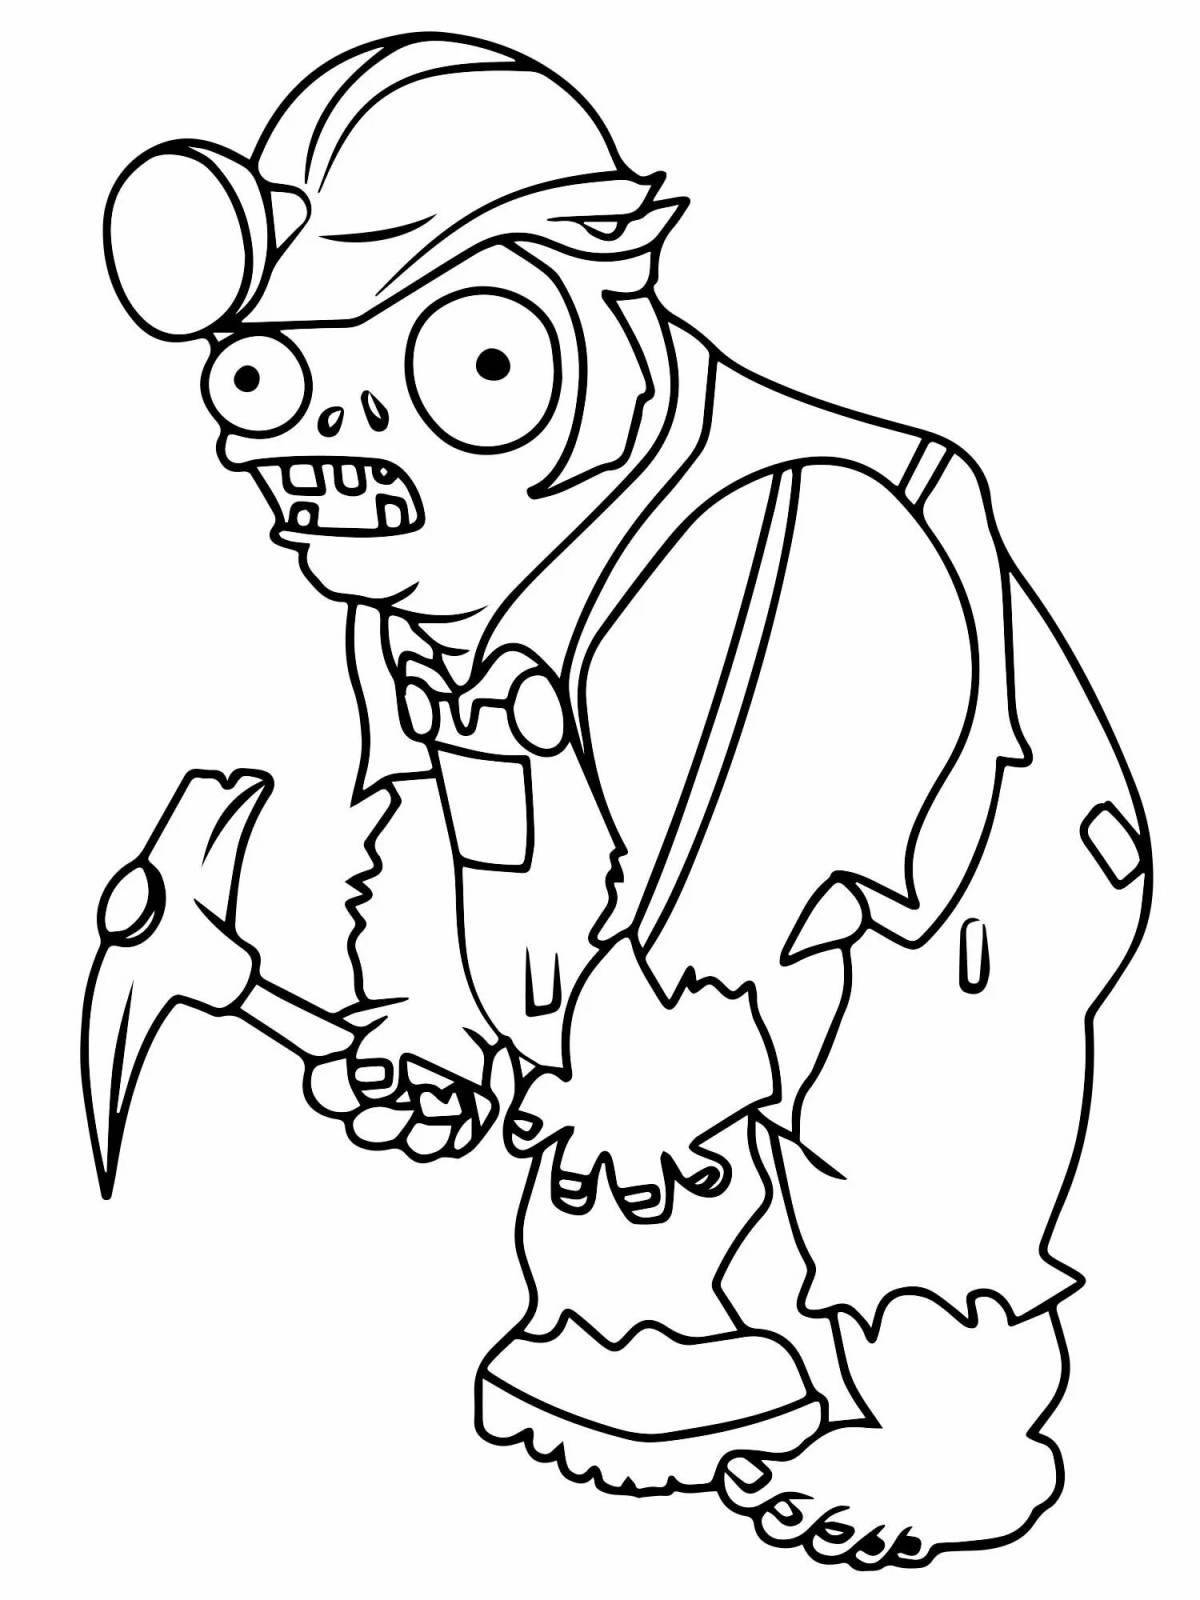 Incredible zombie coloring book for kids